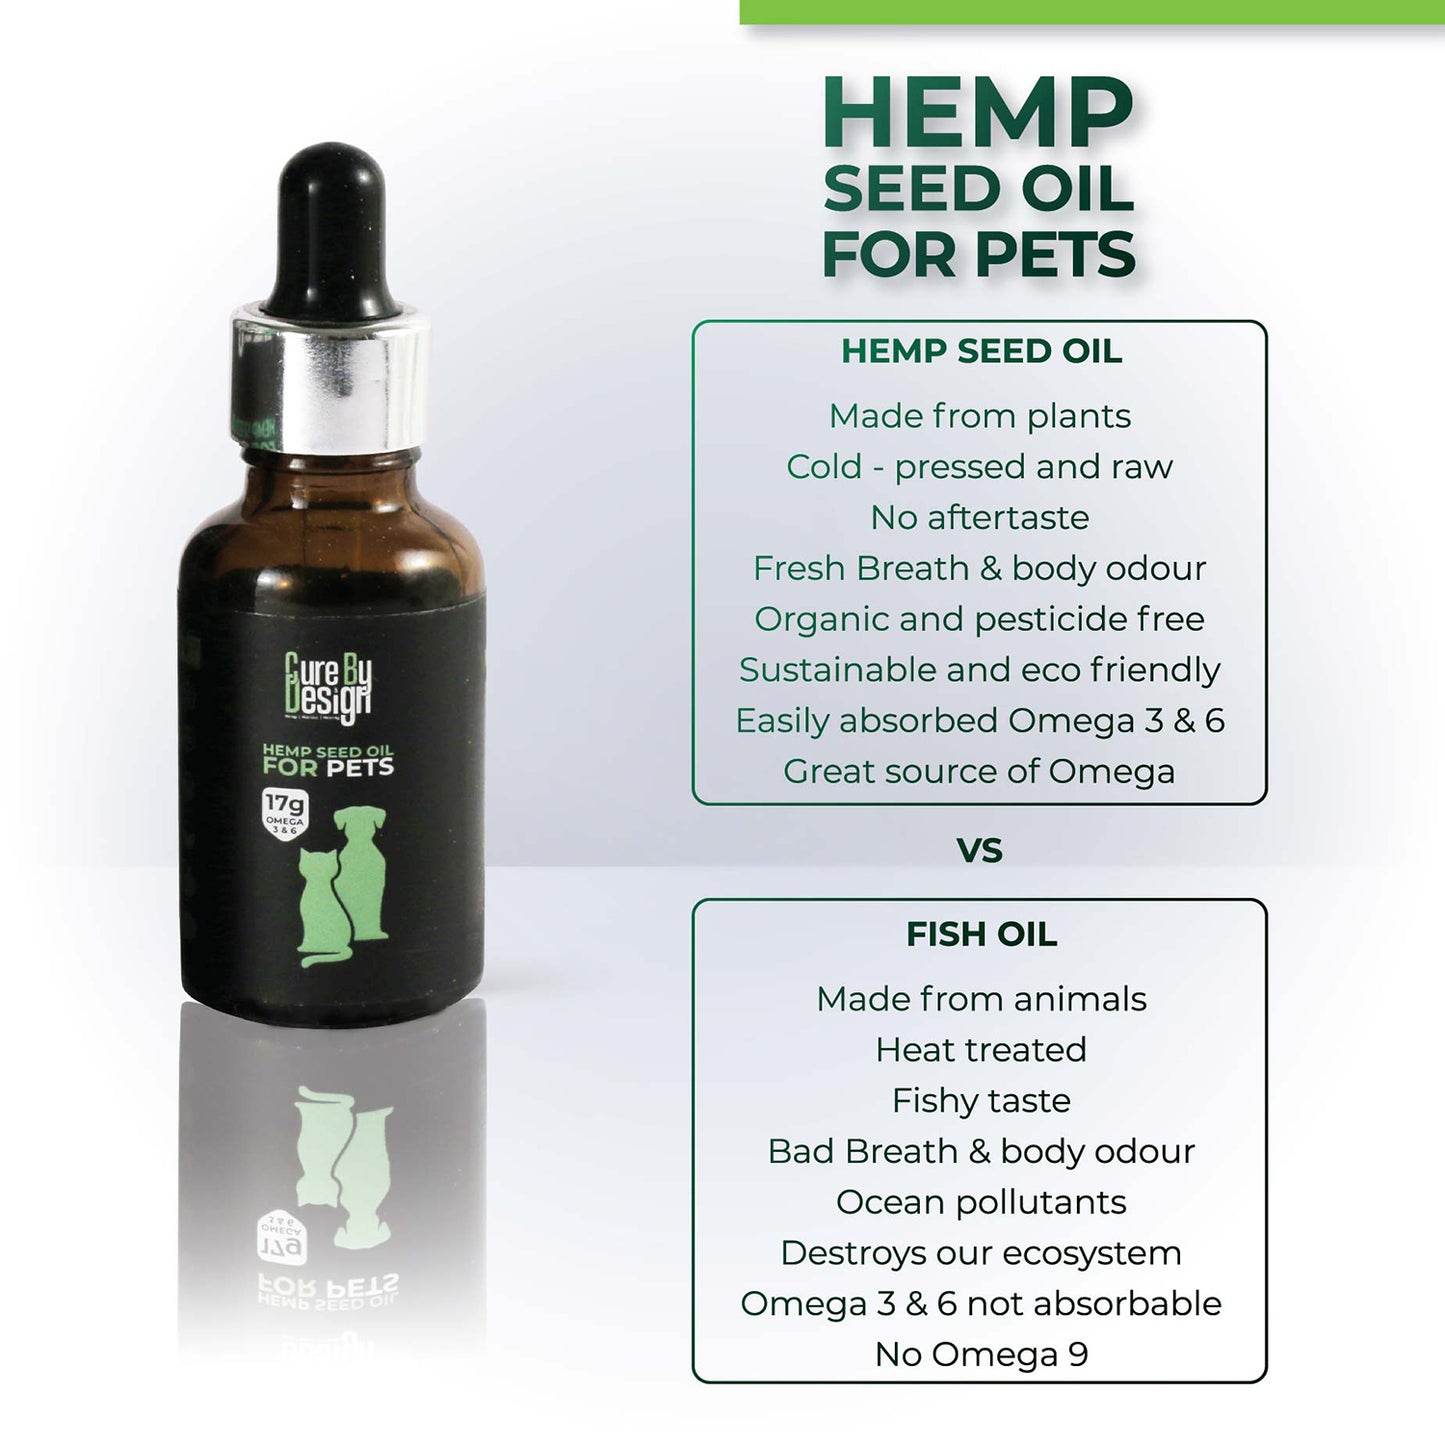 Cure By Design - Hemp Seed Oil For Dogs & Cats